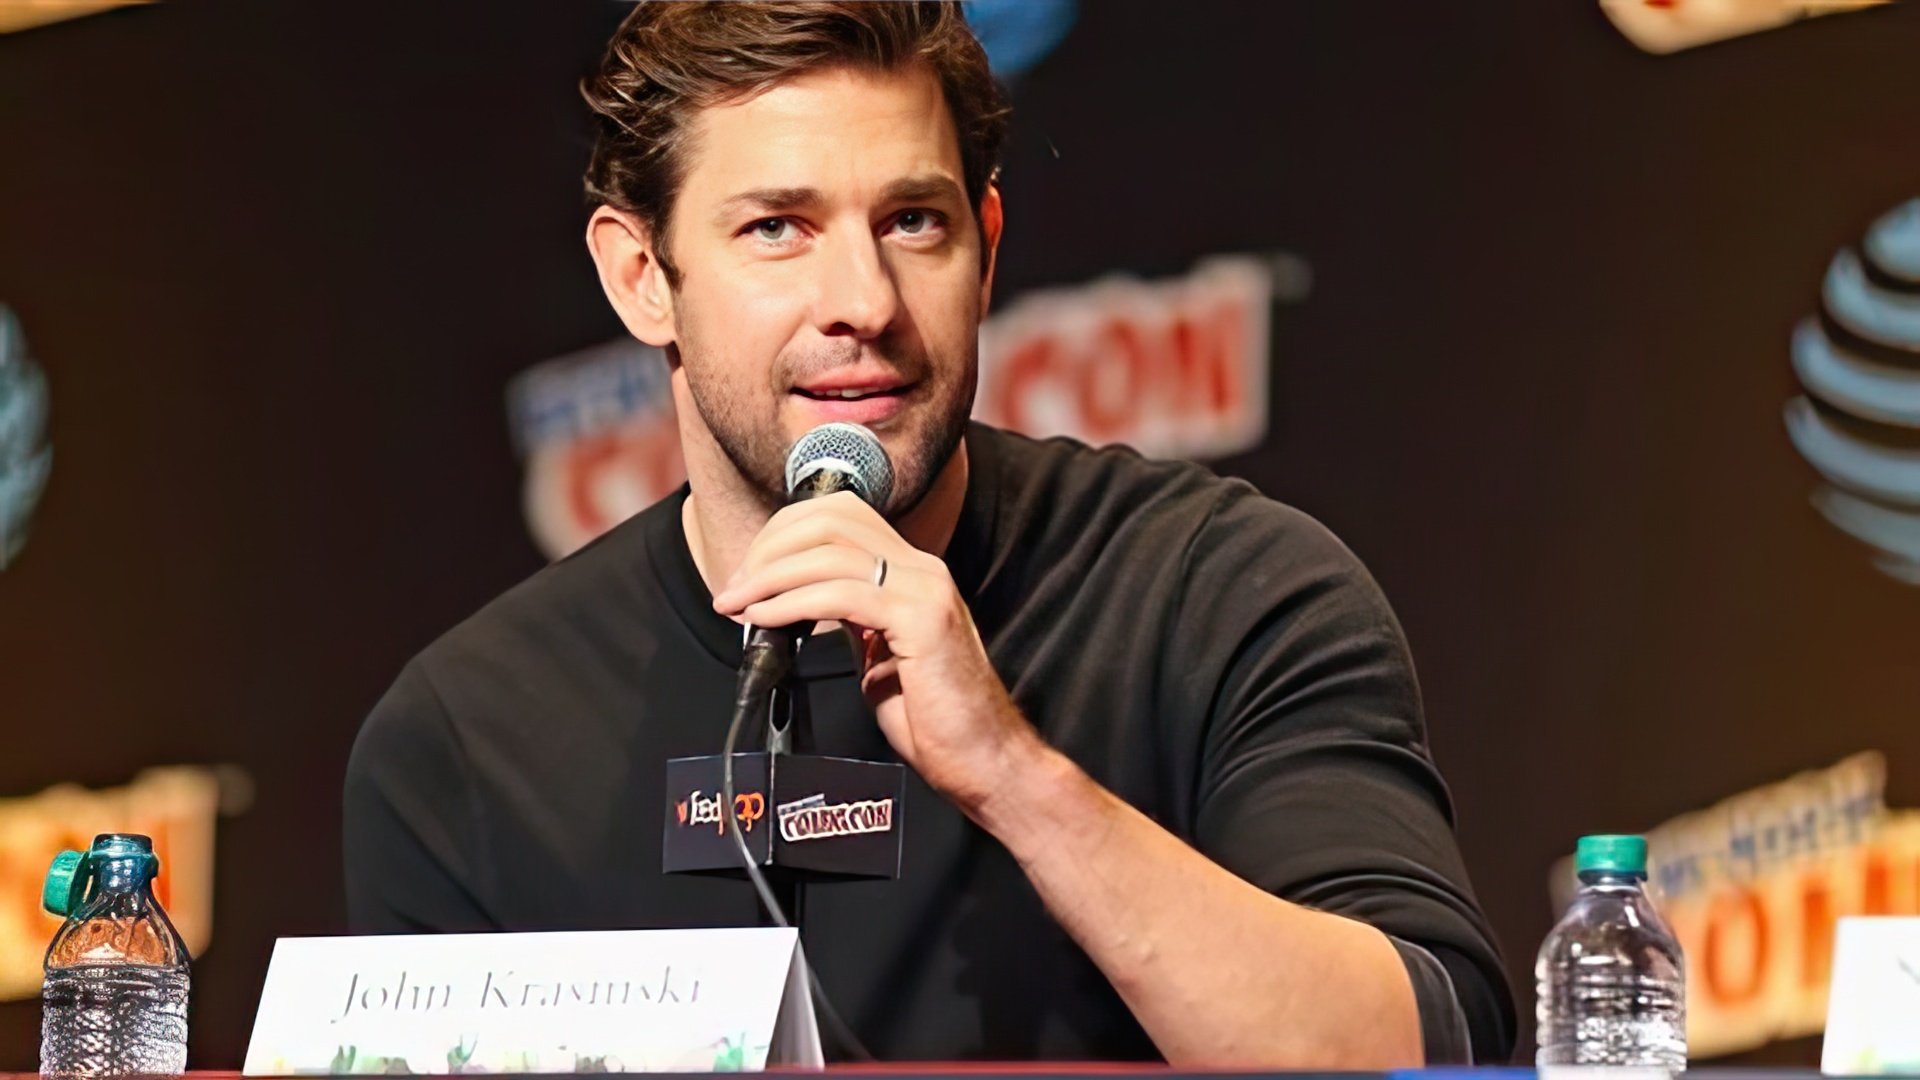 After graduating from Brown University, Krasinski moved to New York.